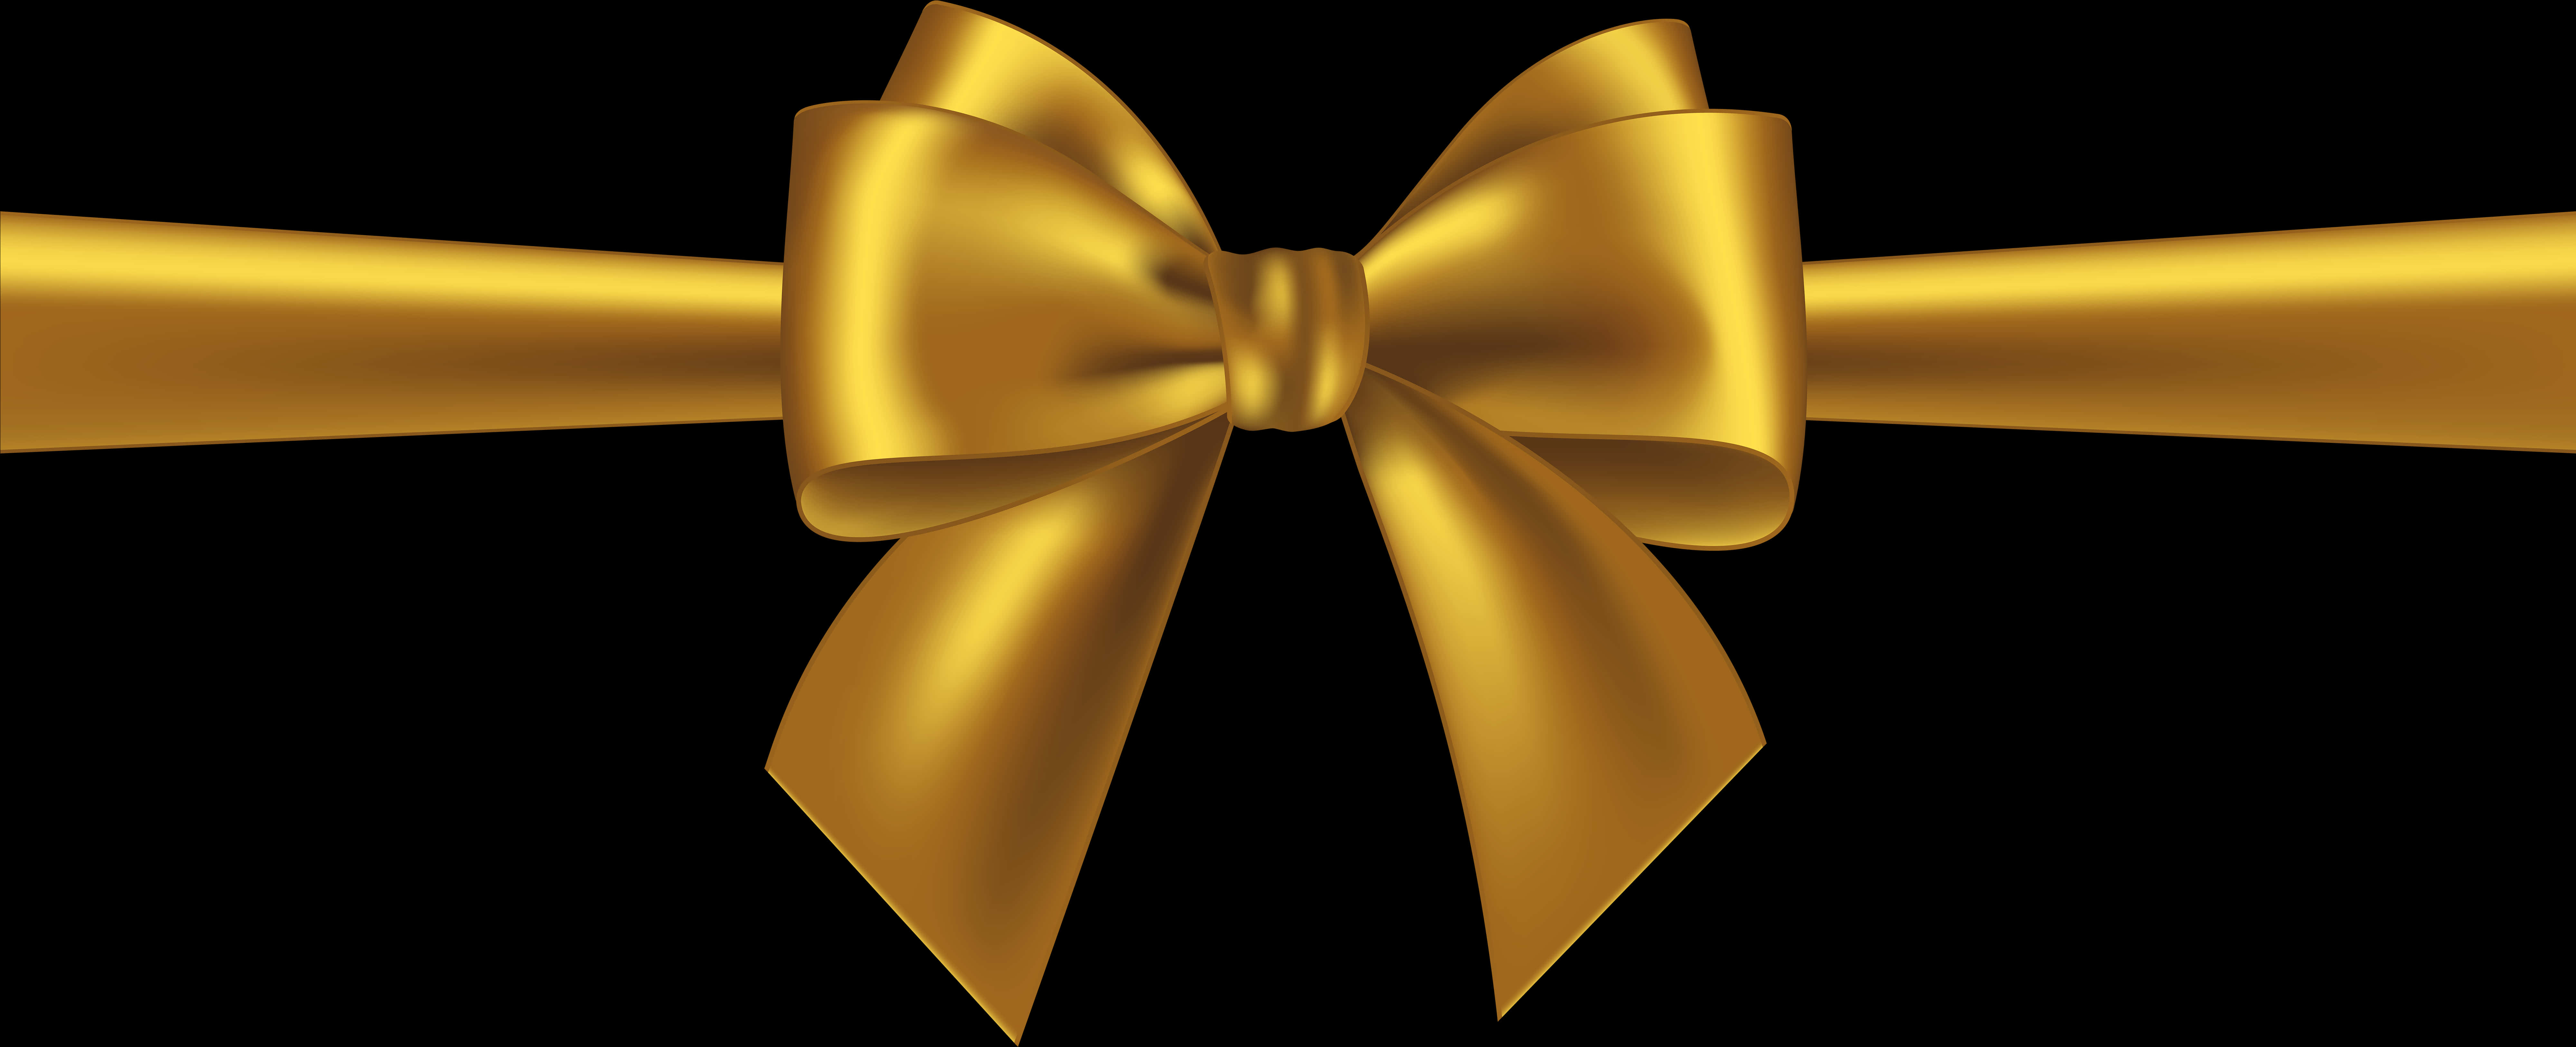 Golden Gift Bow PNG image